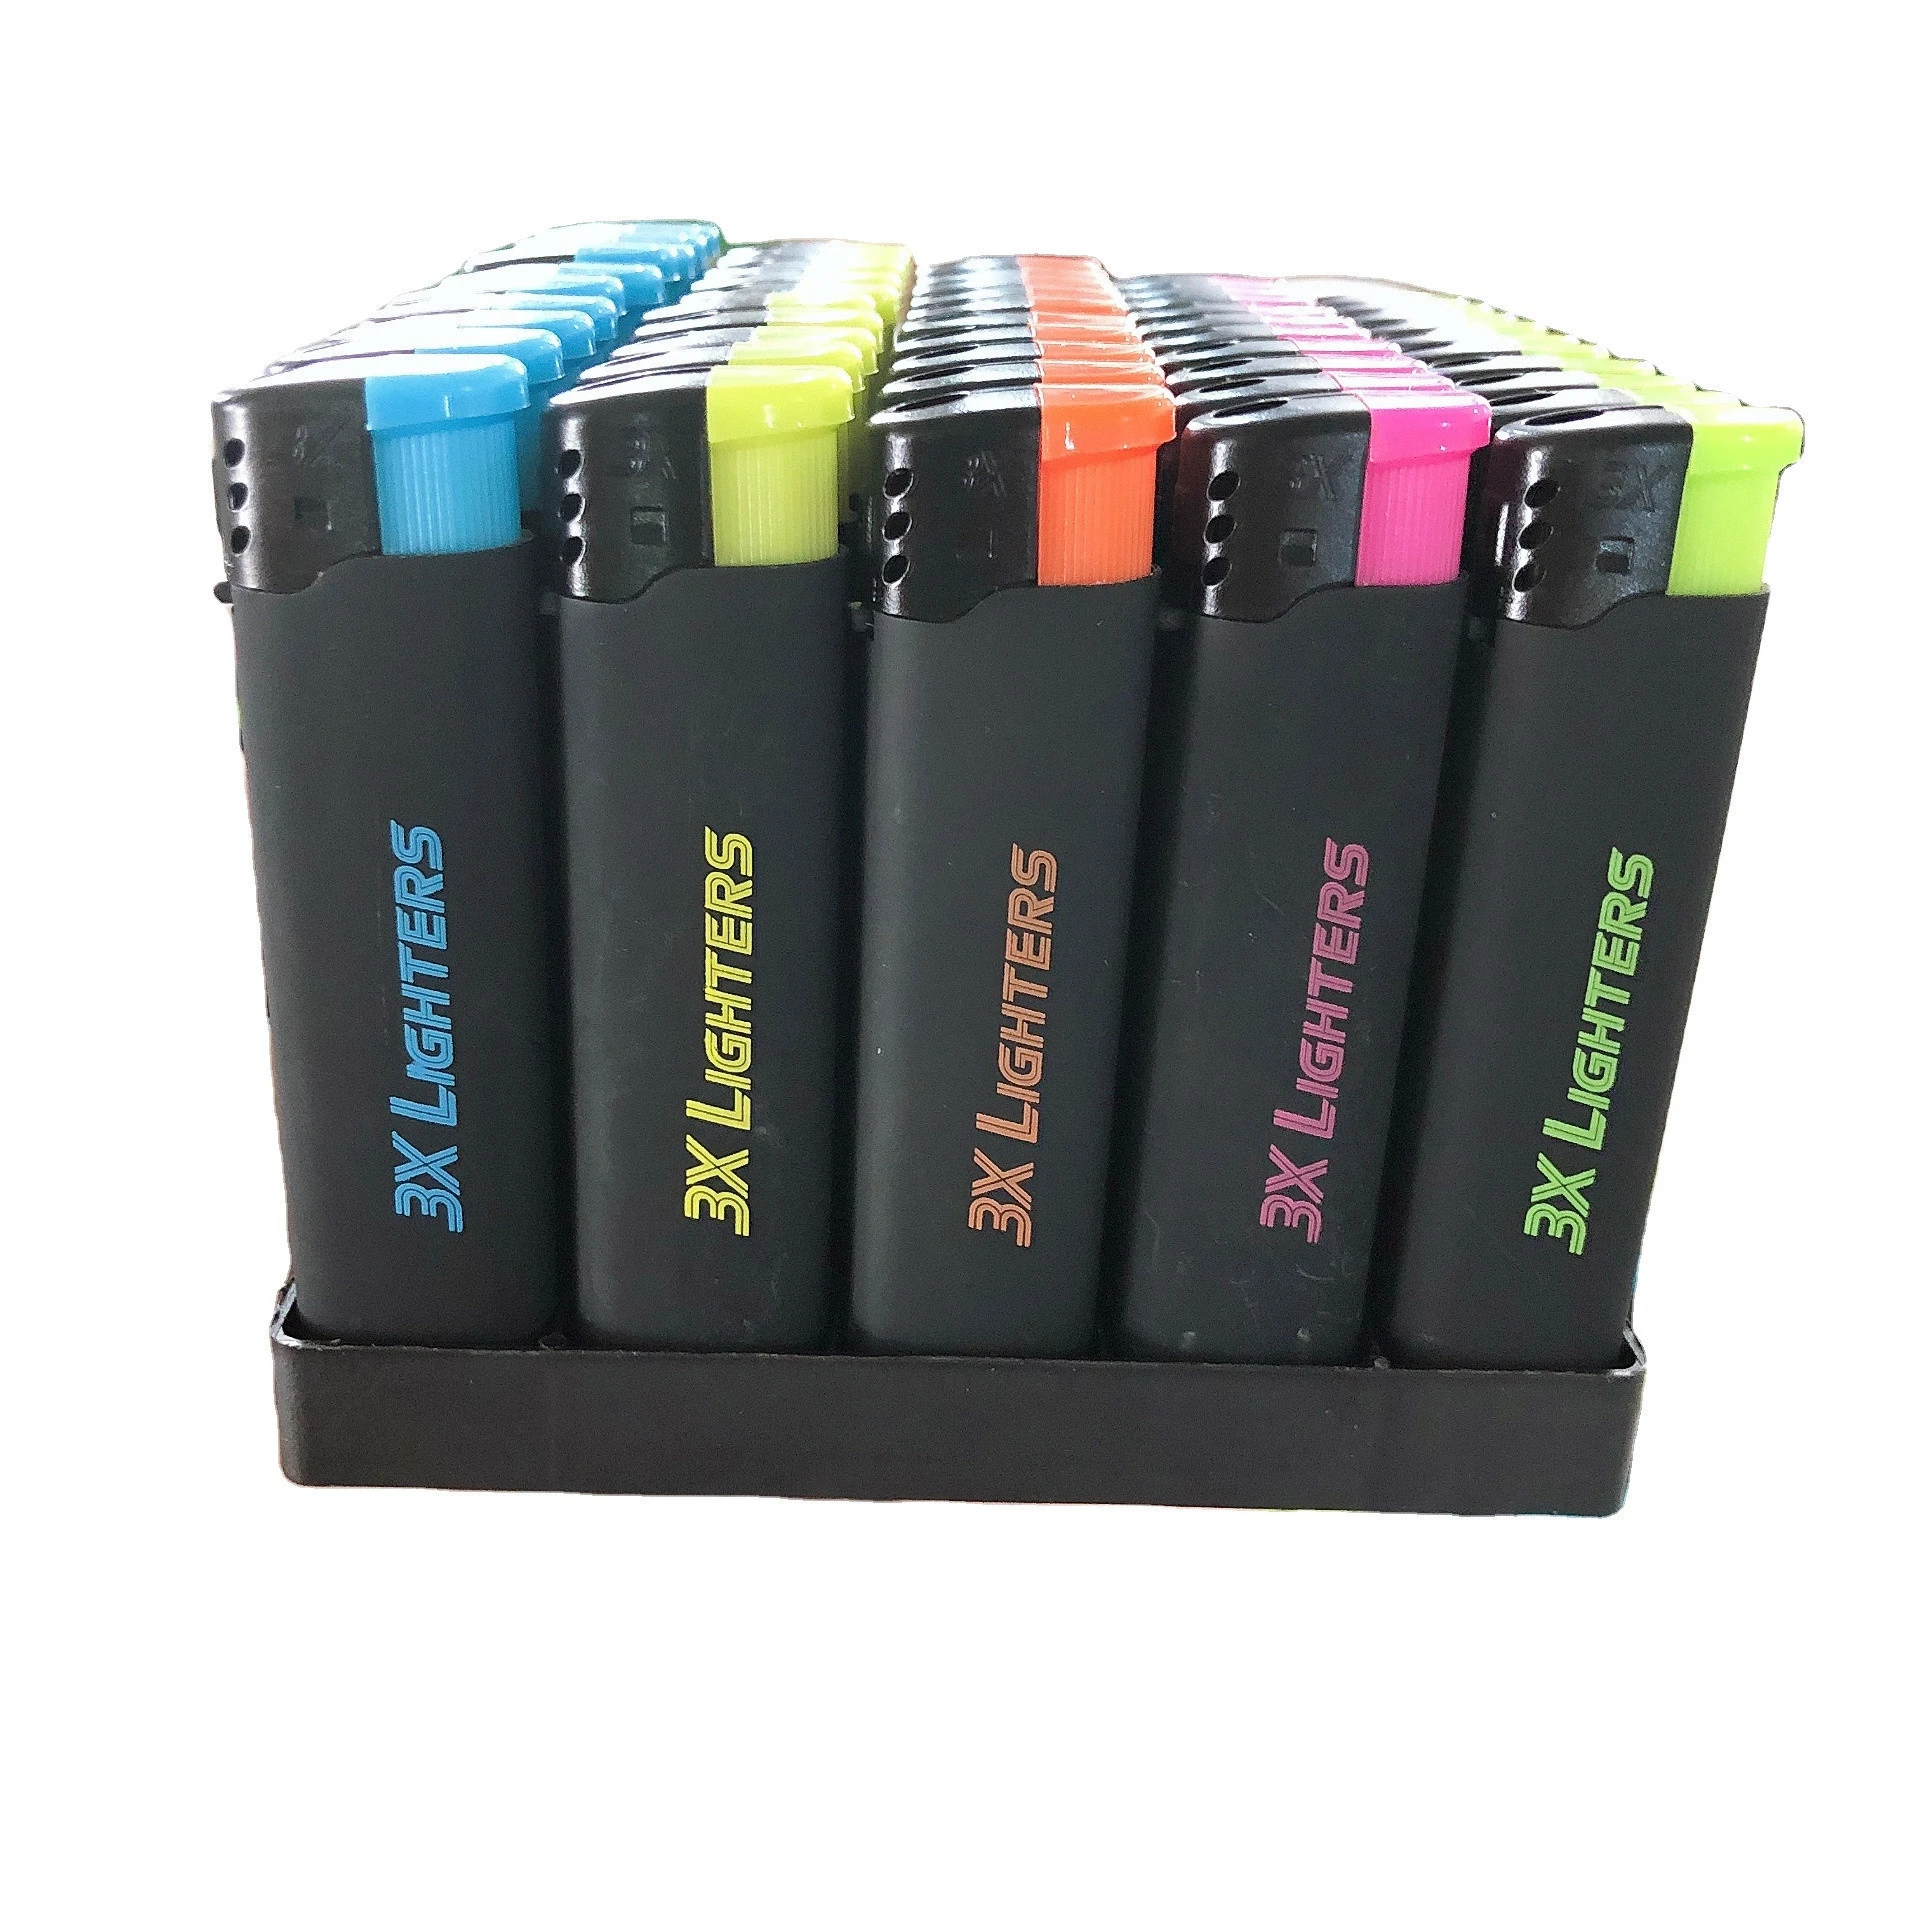 HP127 Isqueiros lighters factory wholesale distributor manufacturer